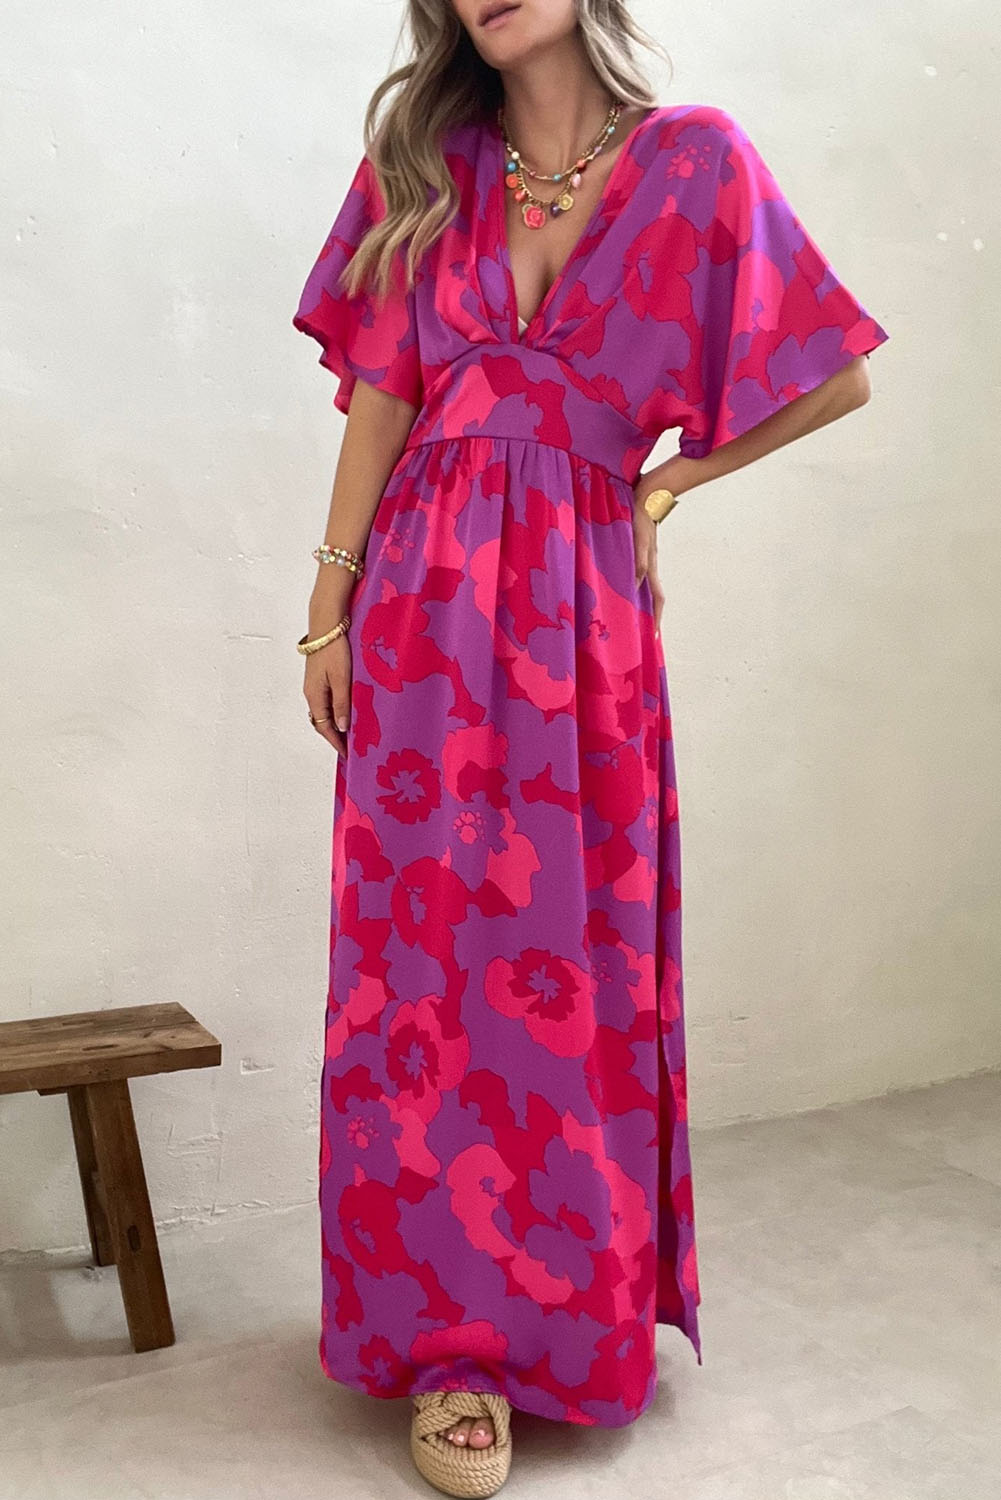 Shewin Wholesale Apparel Suppliers Rose Abstract Floral Print V Neck Split Maxi DRESS